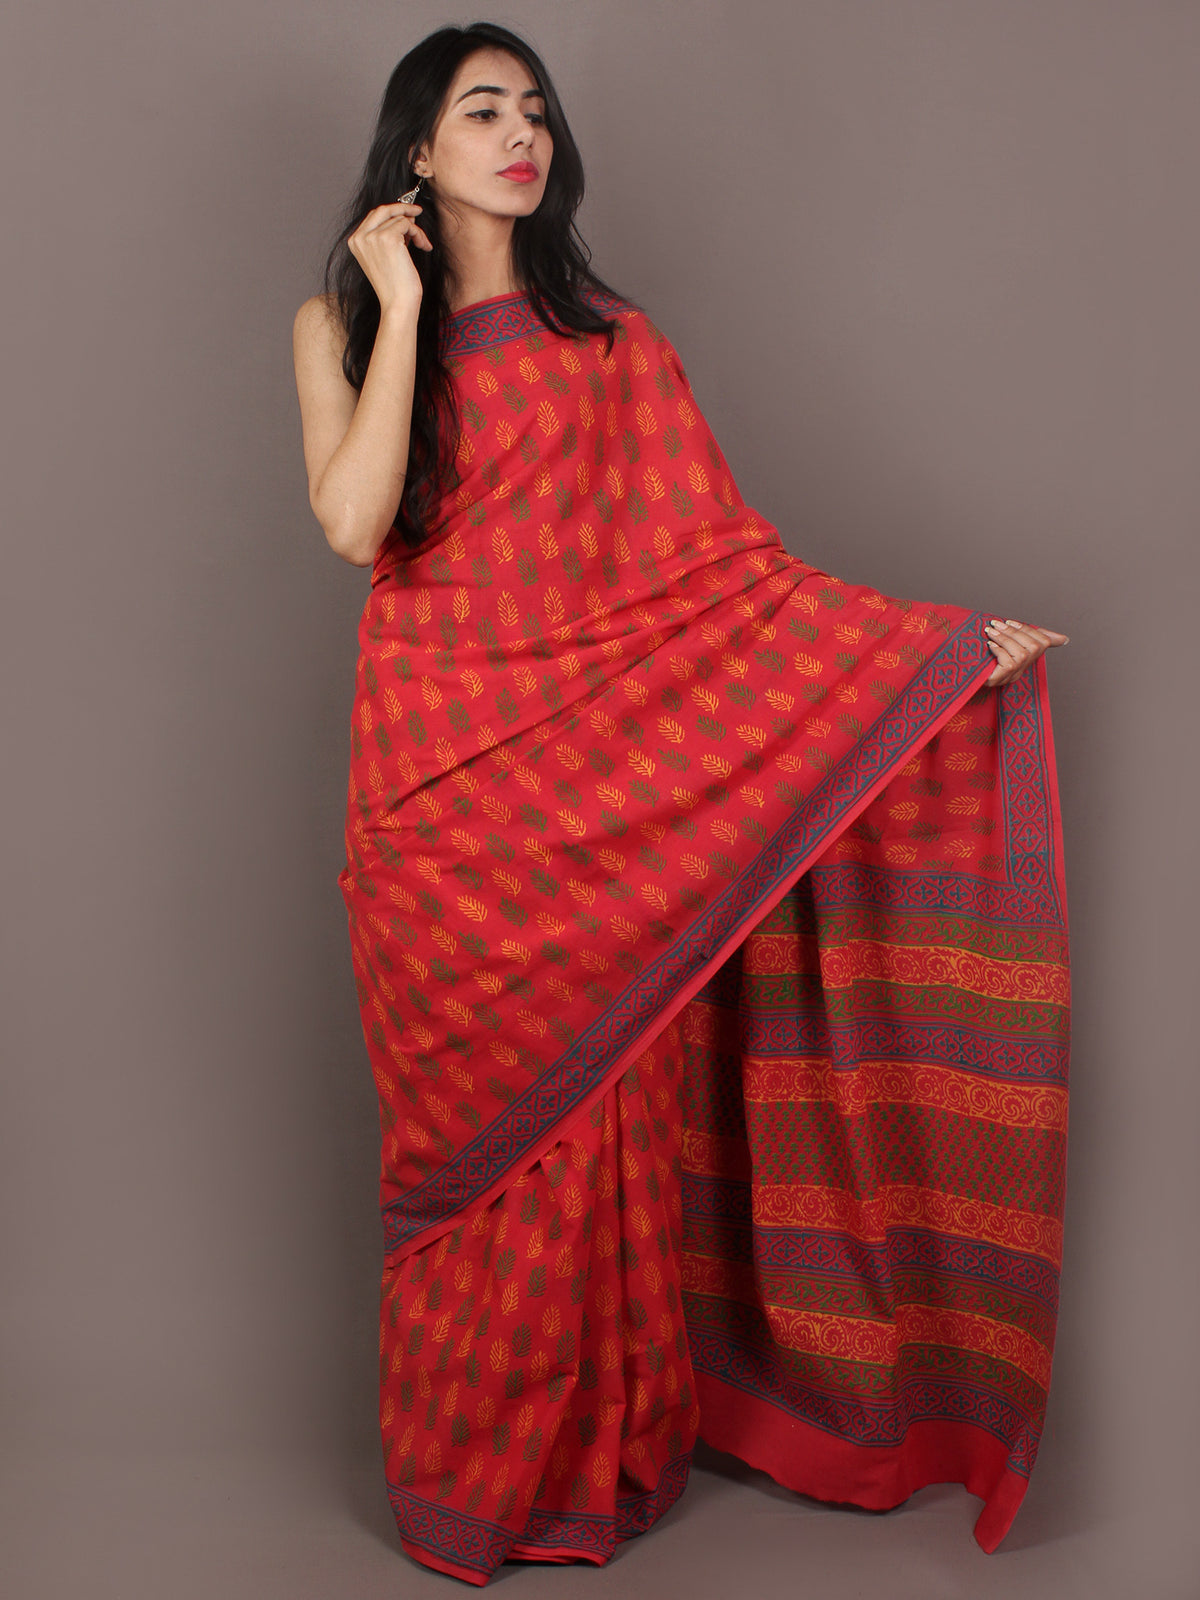 Crimson Red Yellow Green Hand Block Printed in Natural Colors Cotton Mul Saree - S031701086